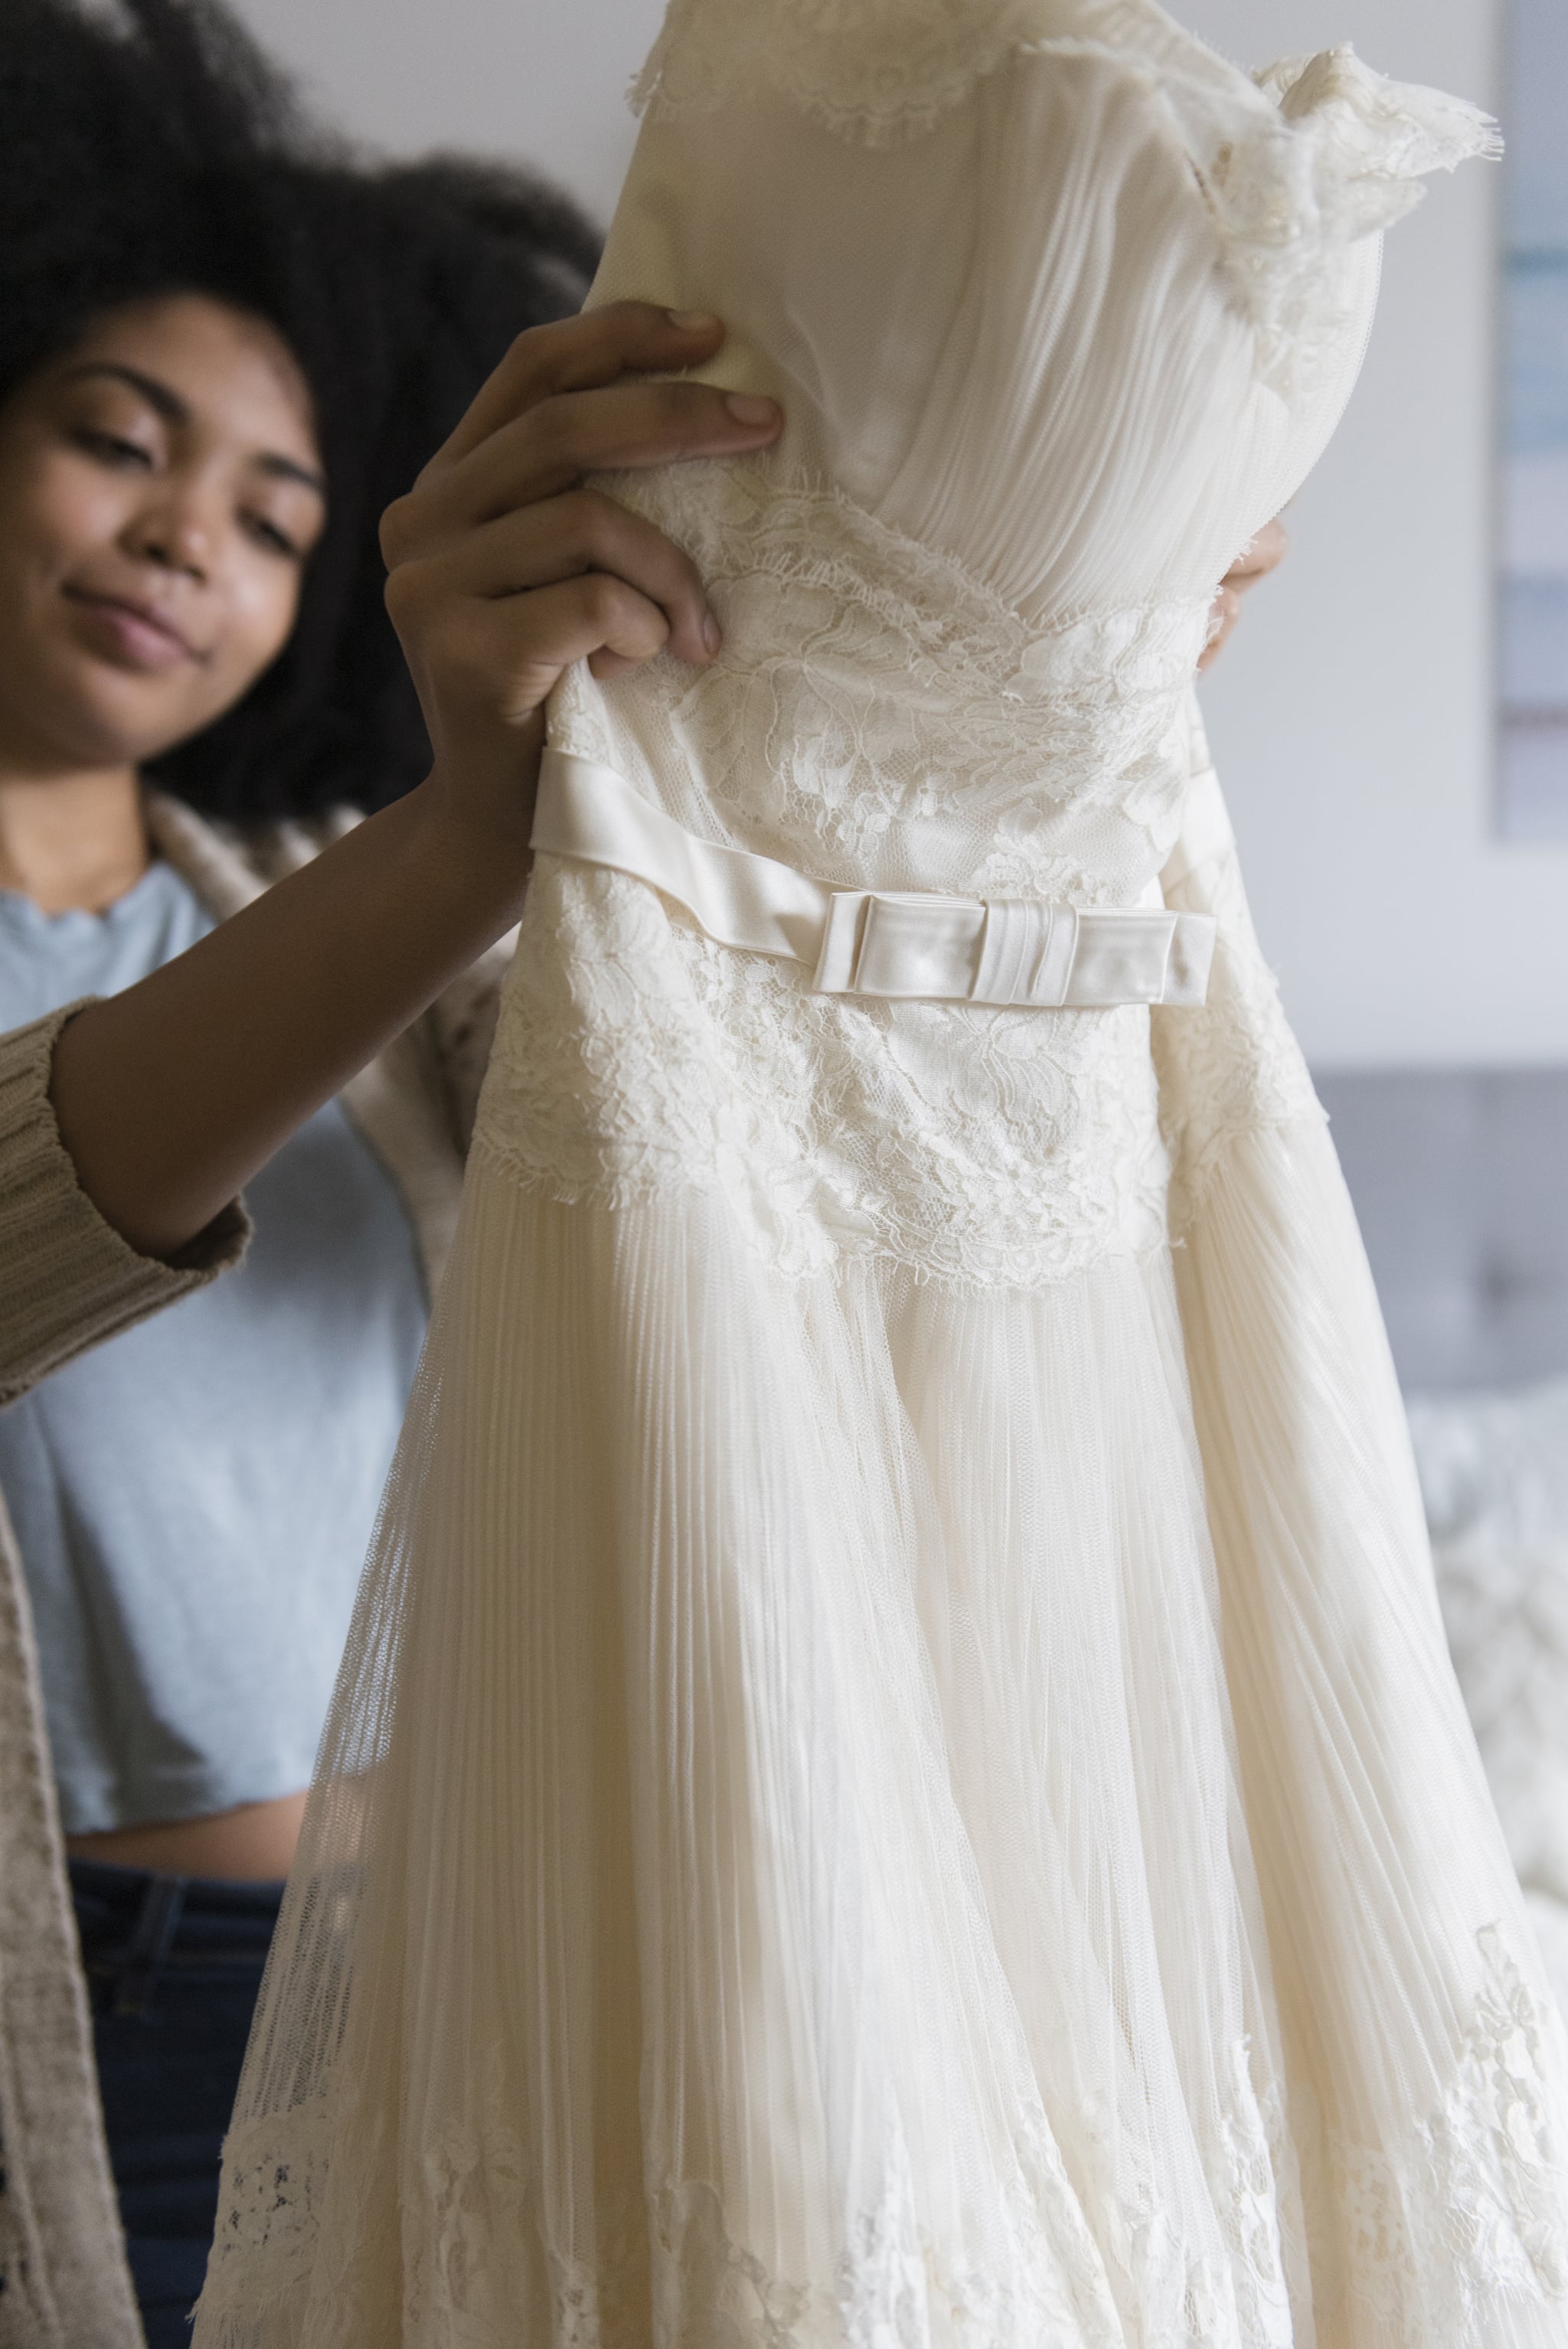 Tips For Buying a Used or Preowned Wedding Dress